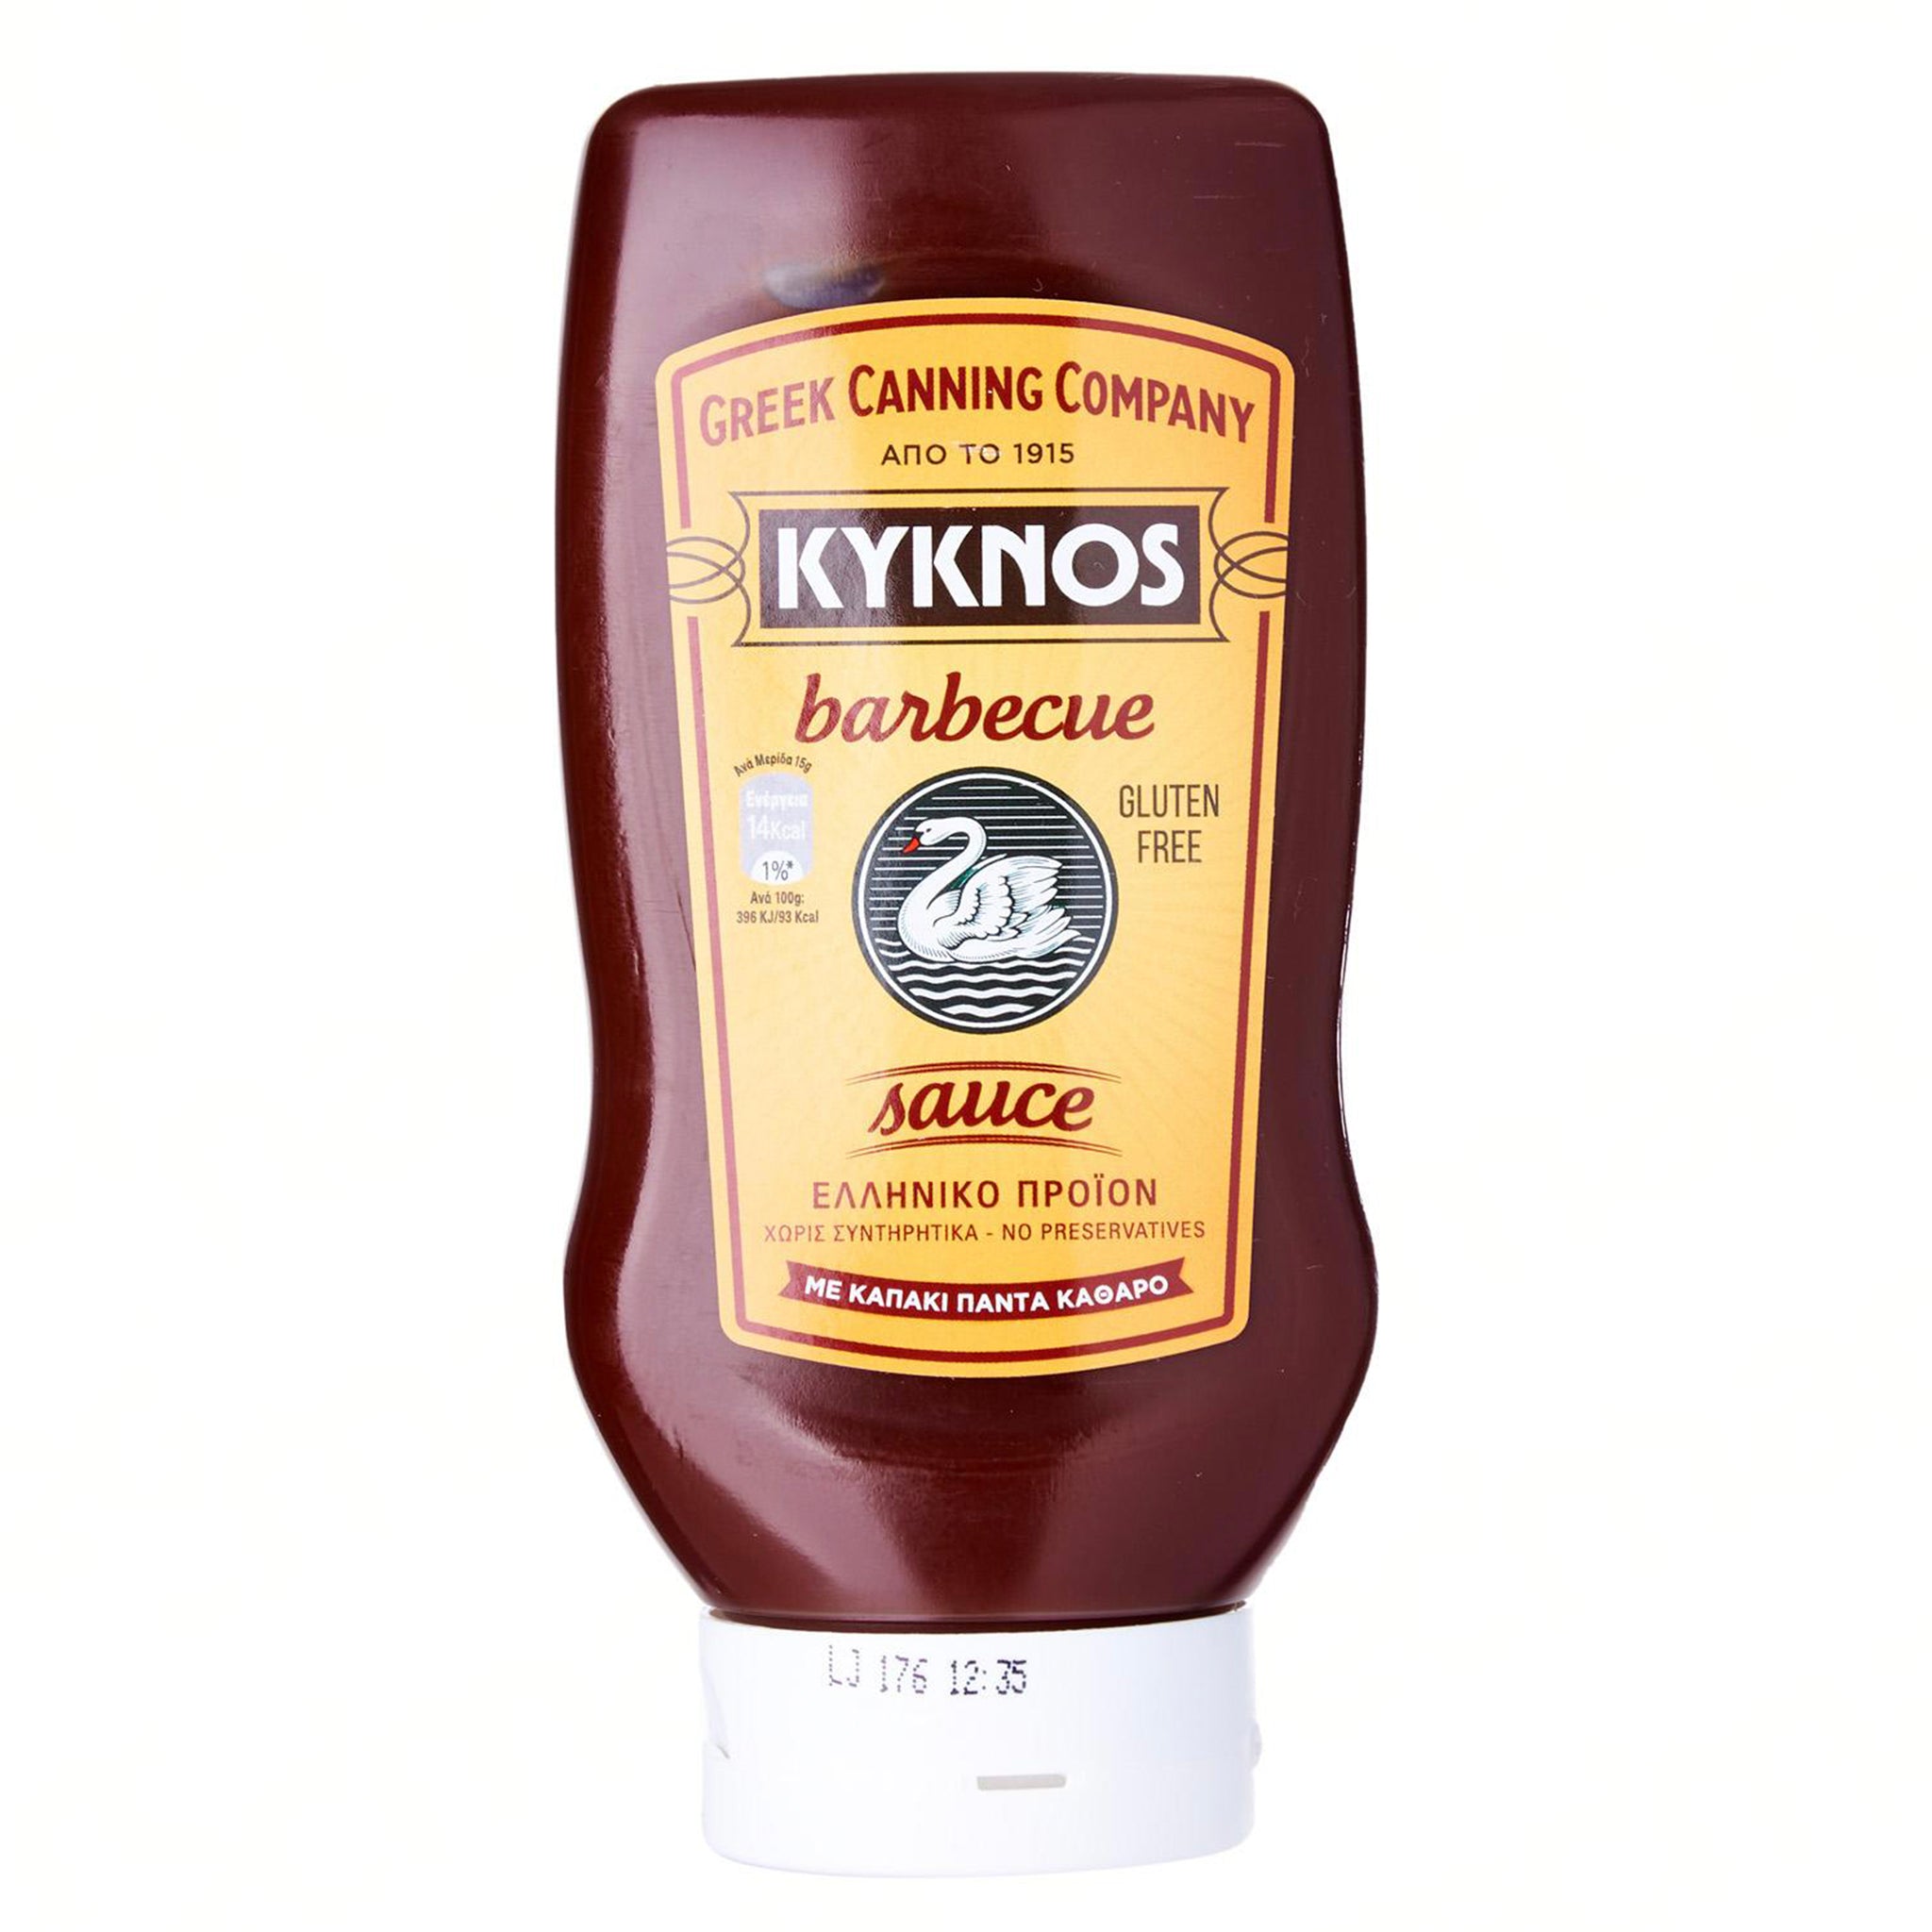 Kyknos Barbecue Sauce Gluten Free, 560 gr